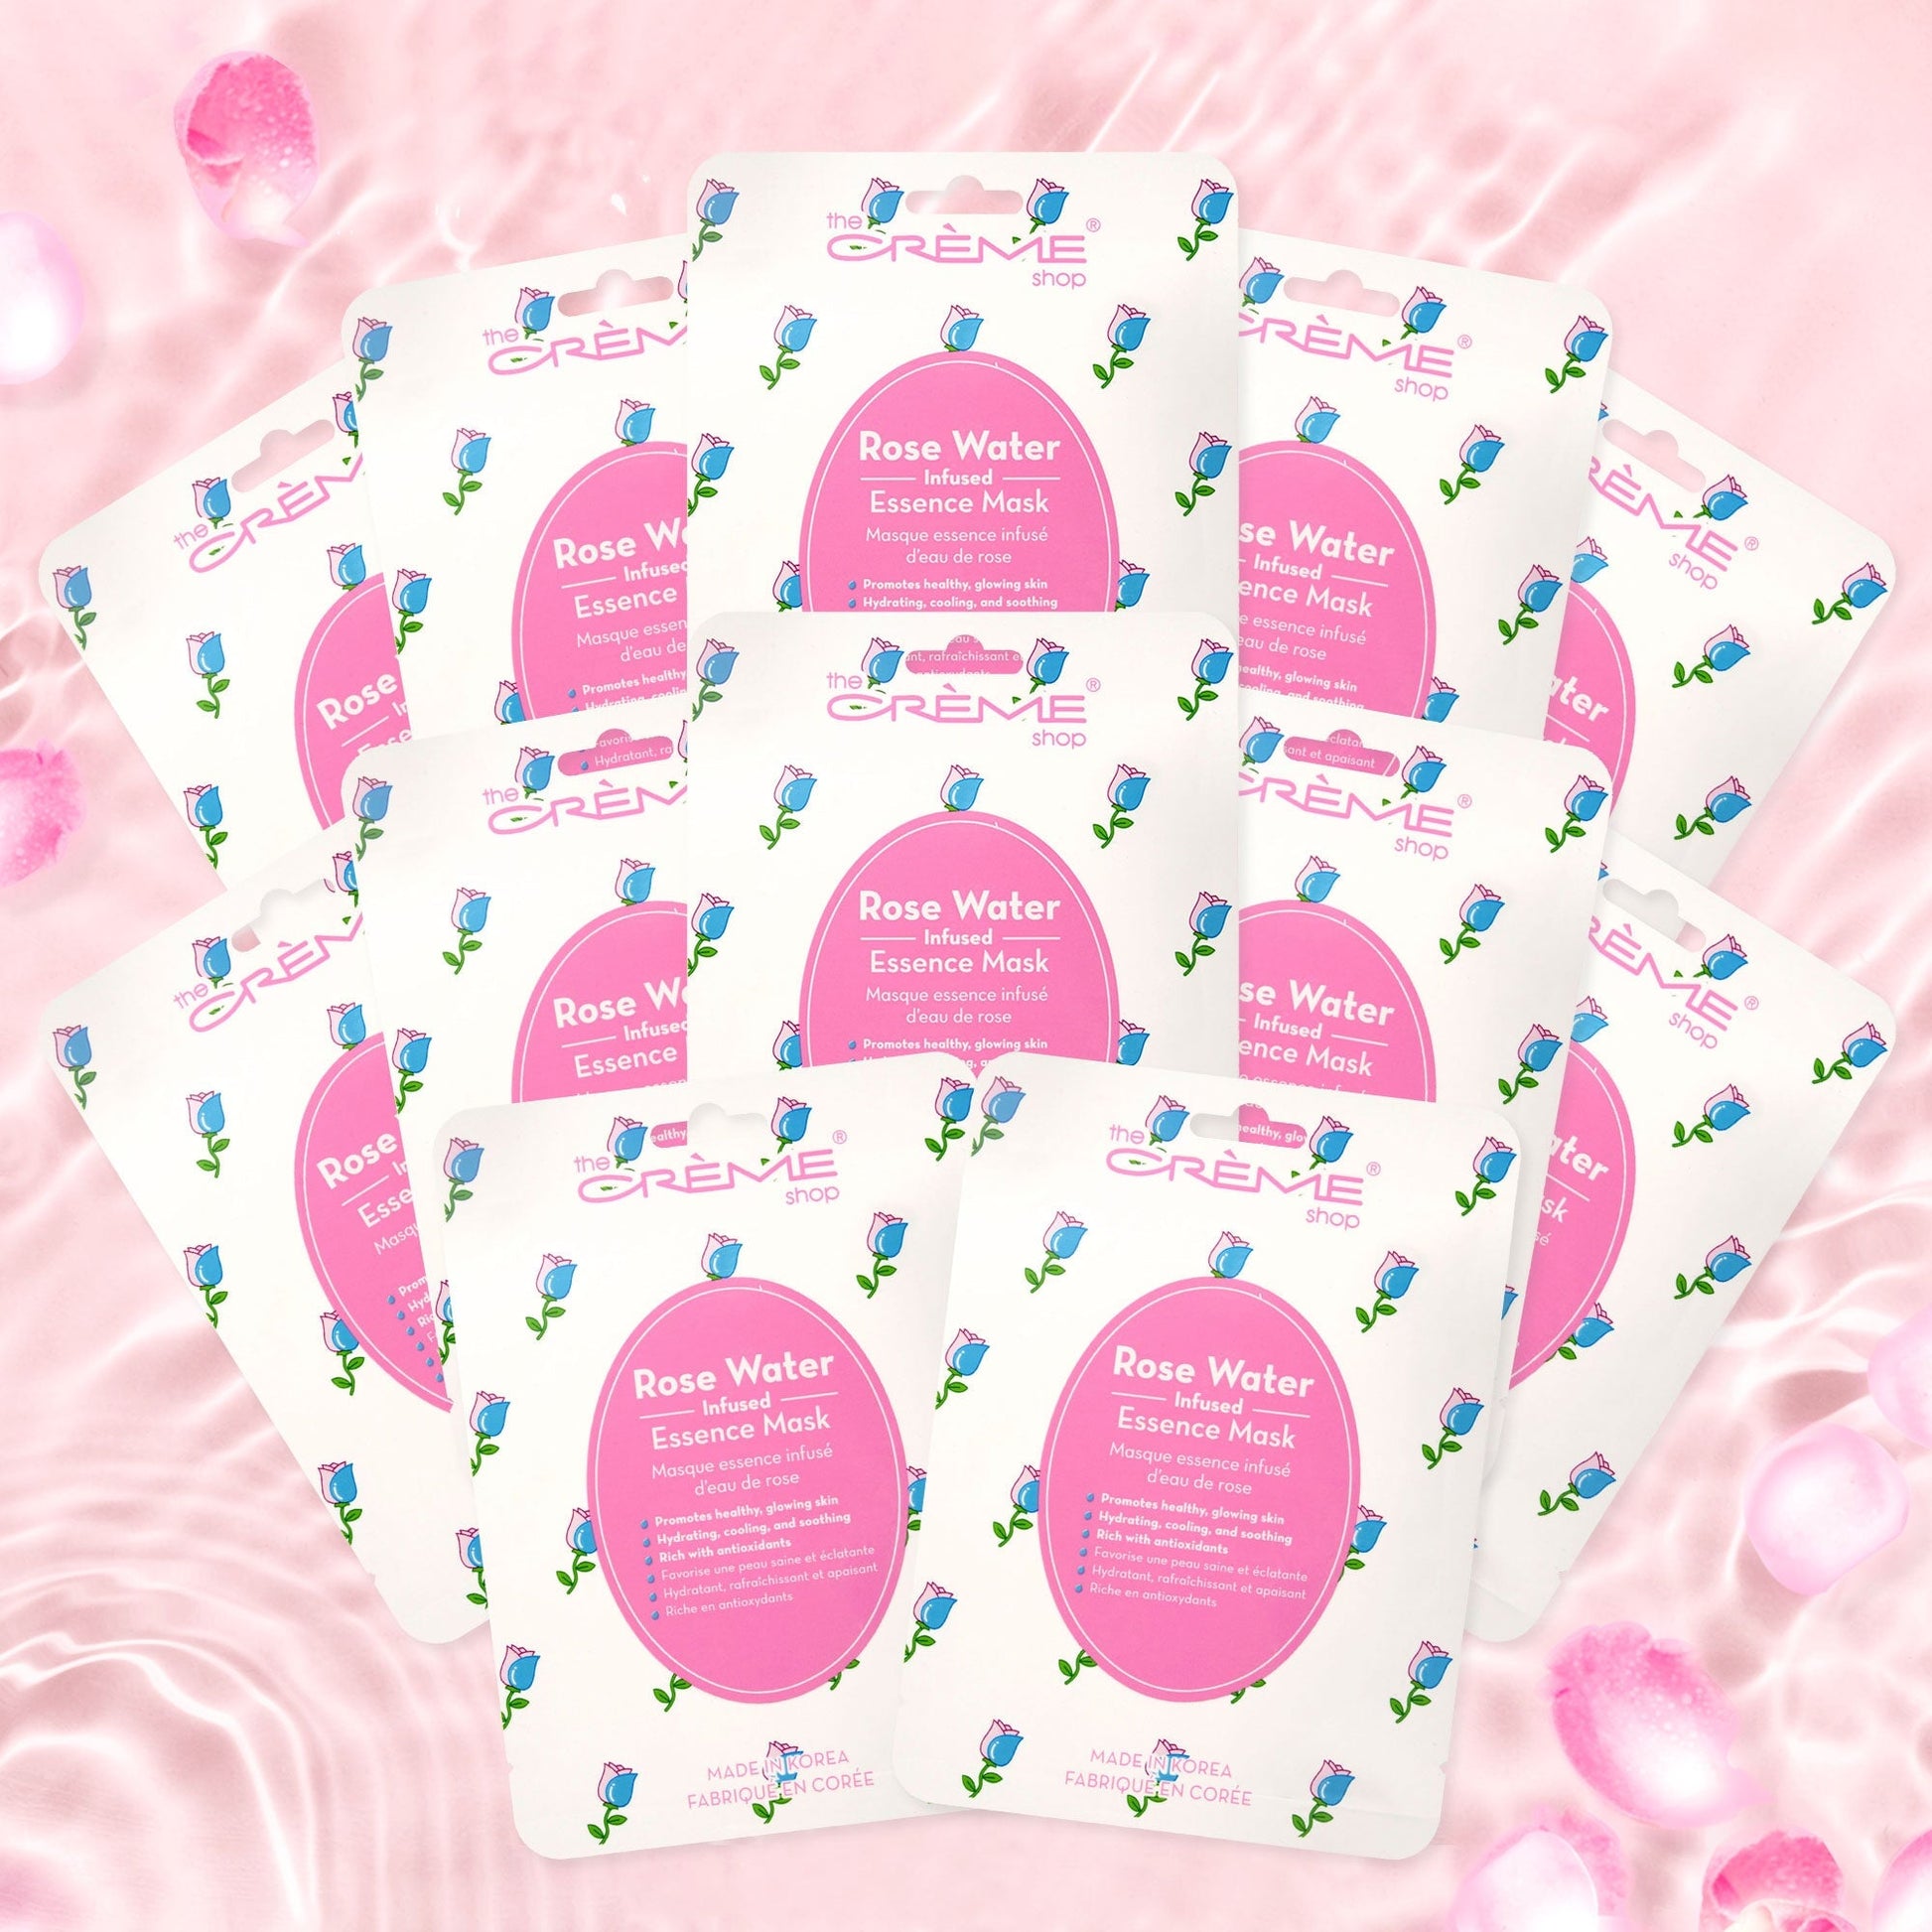 Renewing Mask with Rose Water | For Hydrated Skin (Set of 12) - $36 Value Sheet masks The Crème Shop 